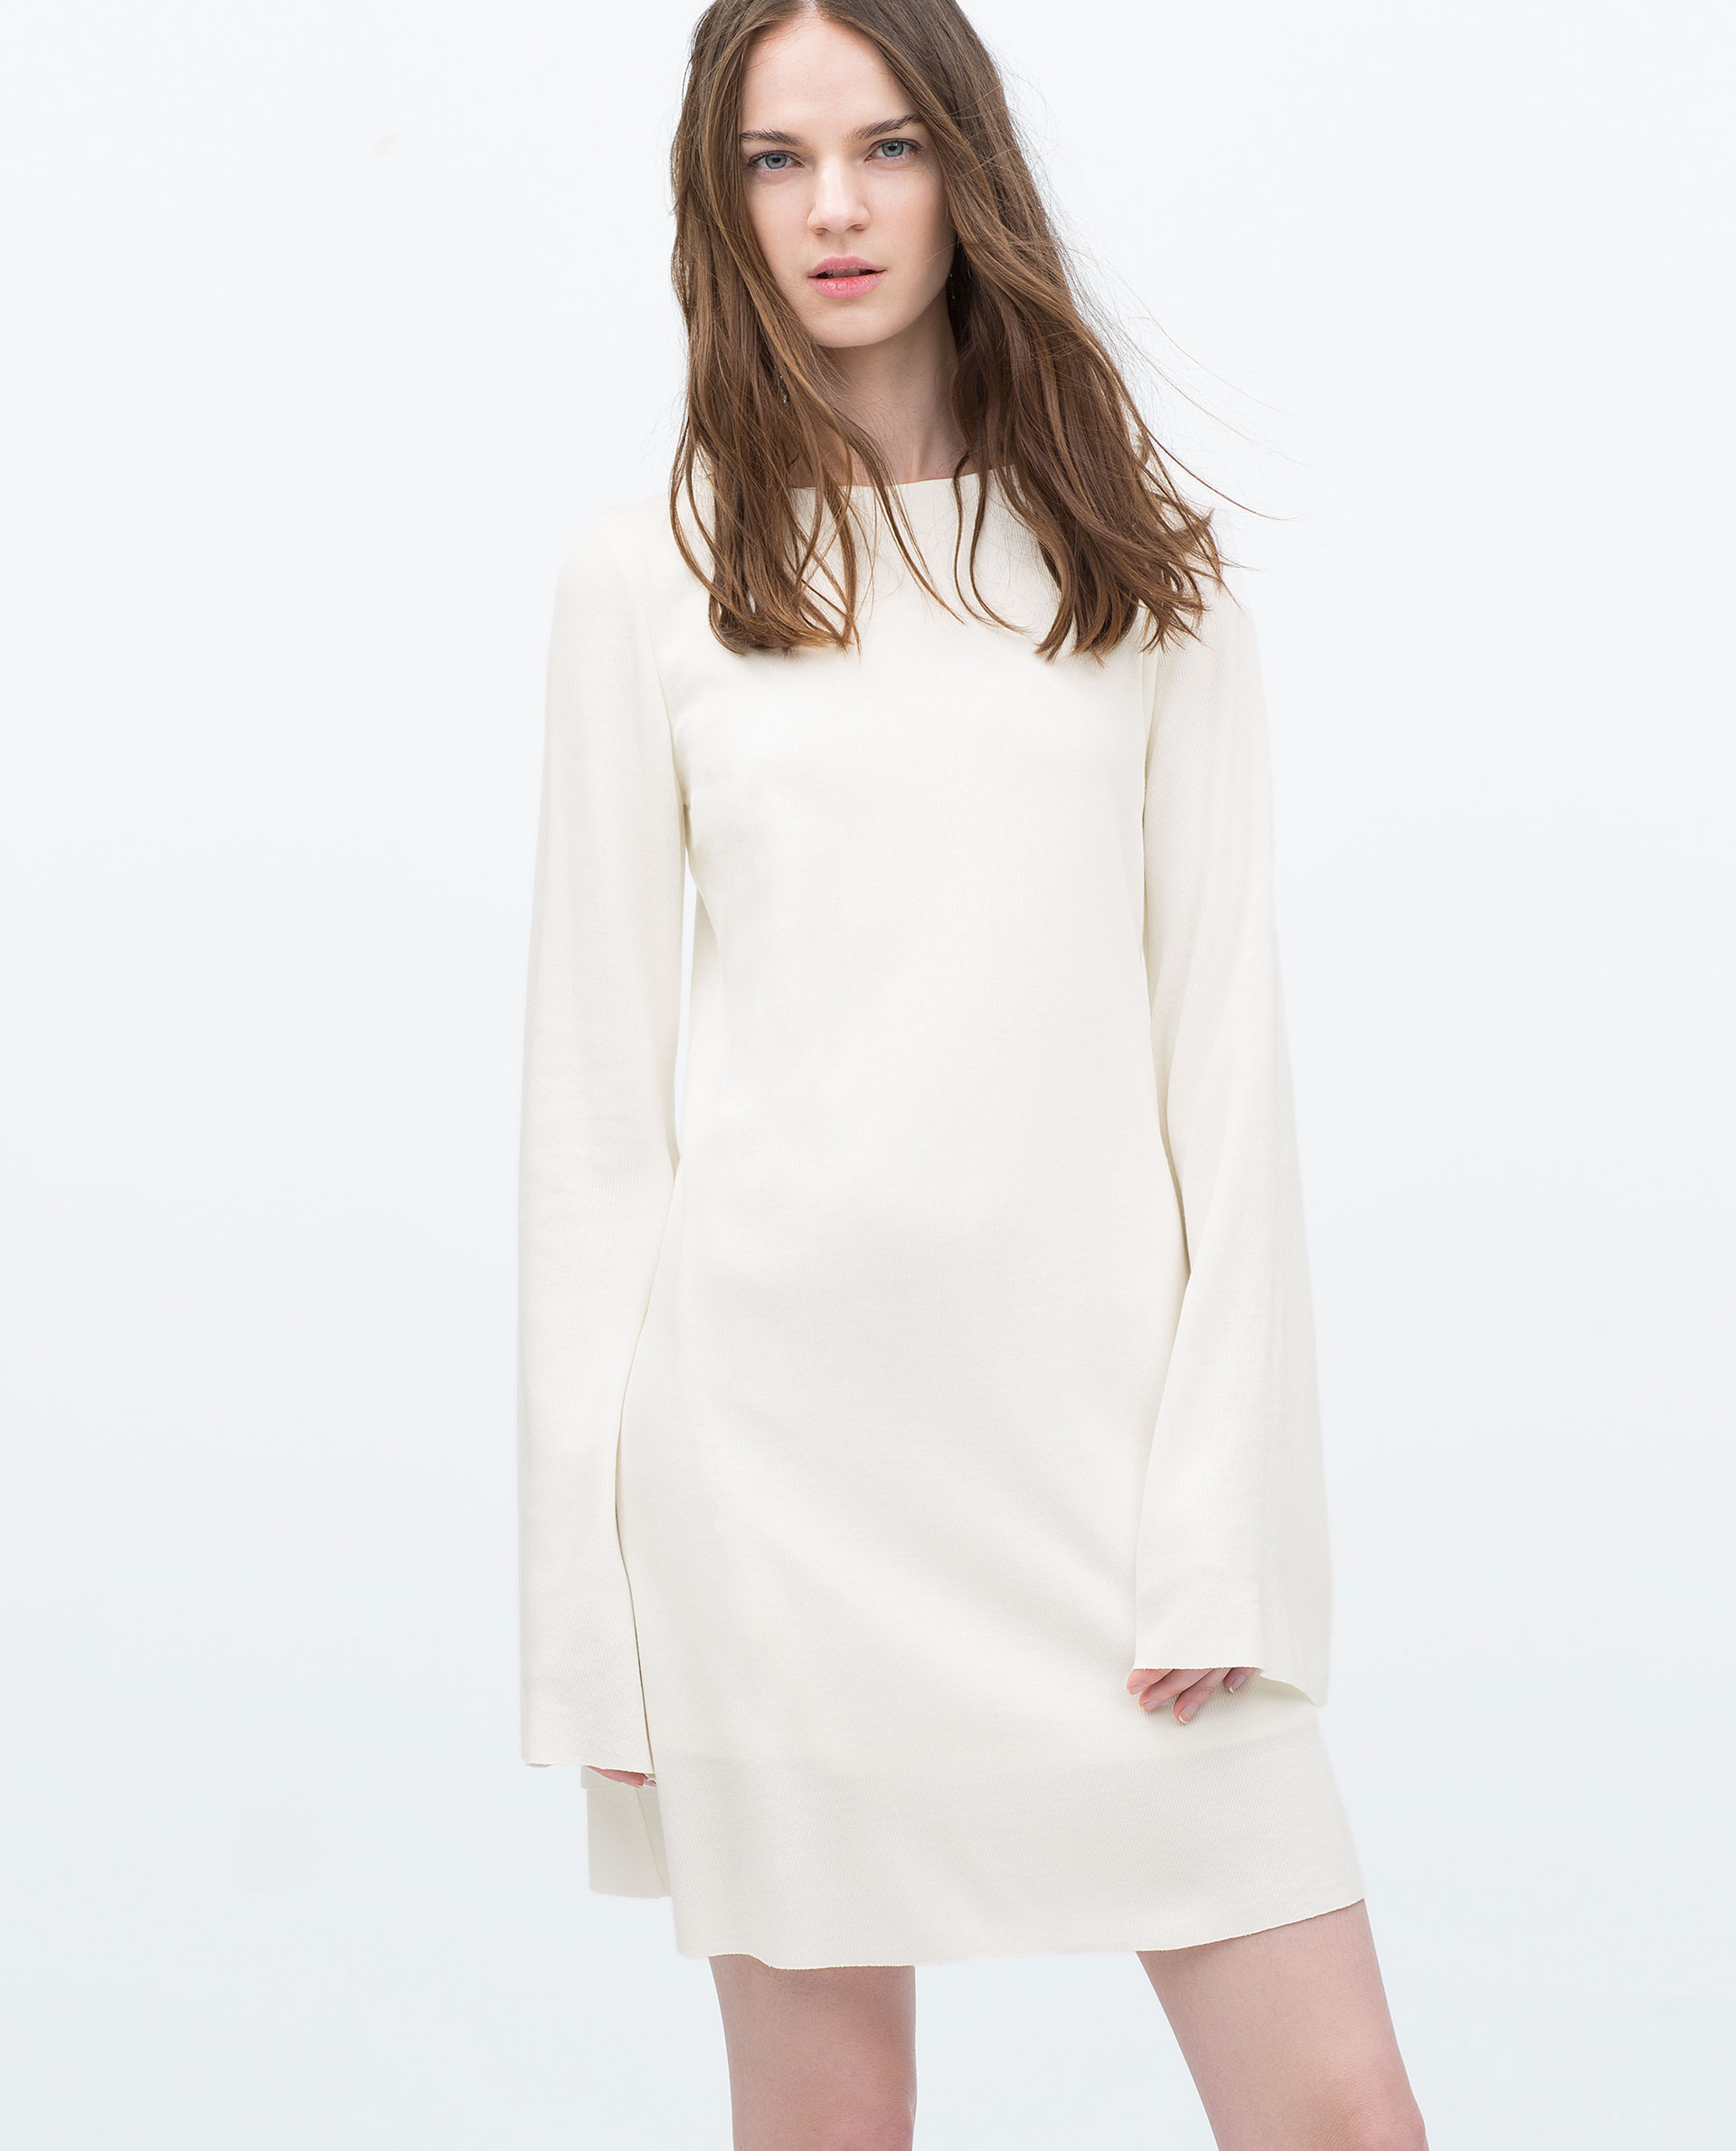 Zara Dress With Low-Cut Back Dress With Low-Cut Back in White | Lyst